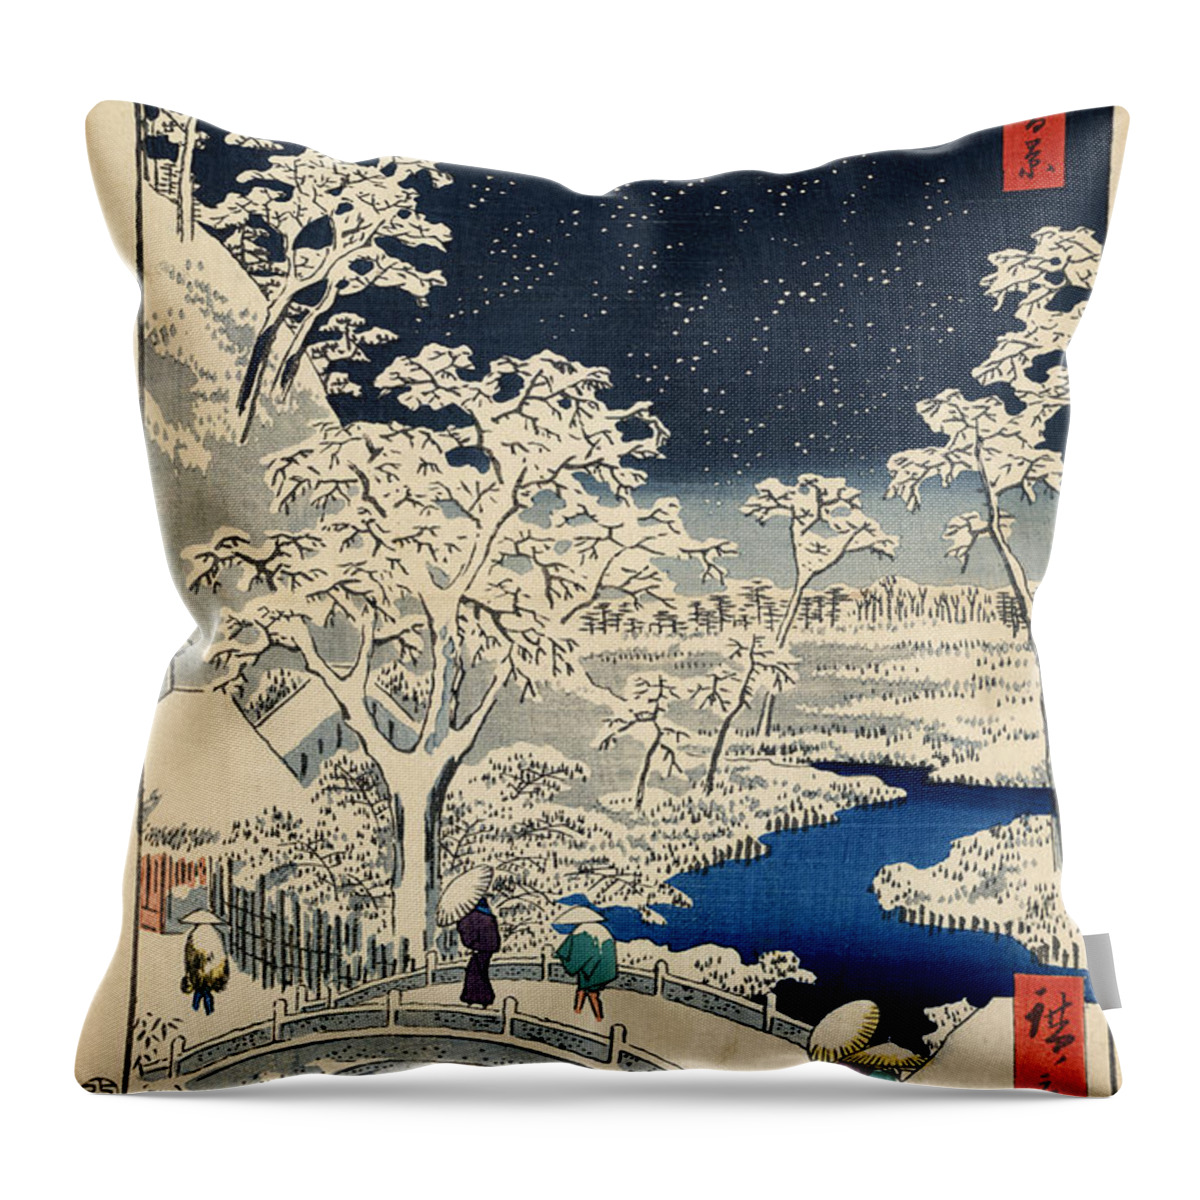 Meguro Throw Pillow featuring the digital art Drum Bridge at Meguro and Sunset Hill by Georgia Fowler